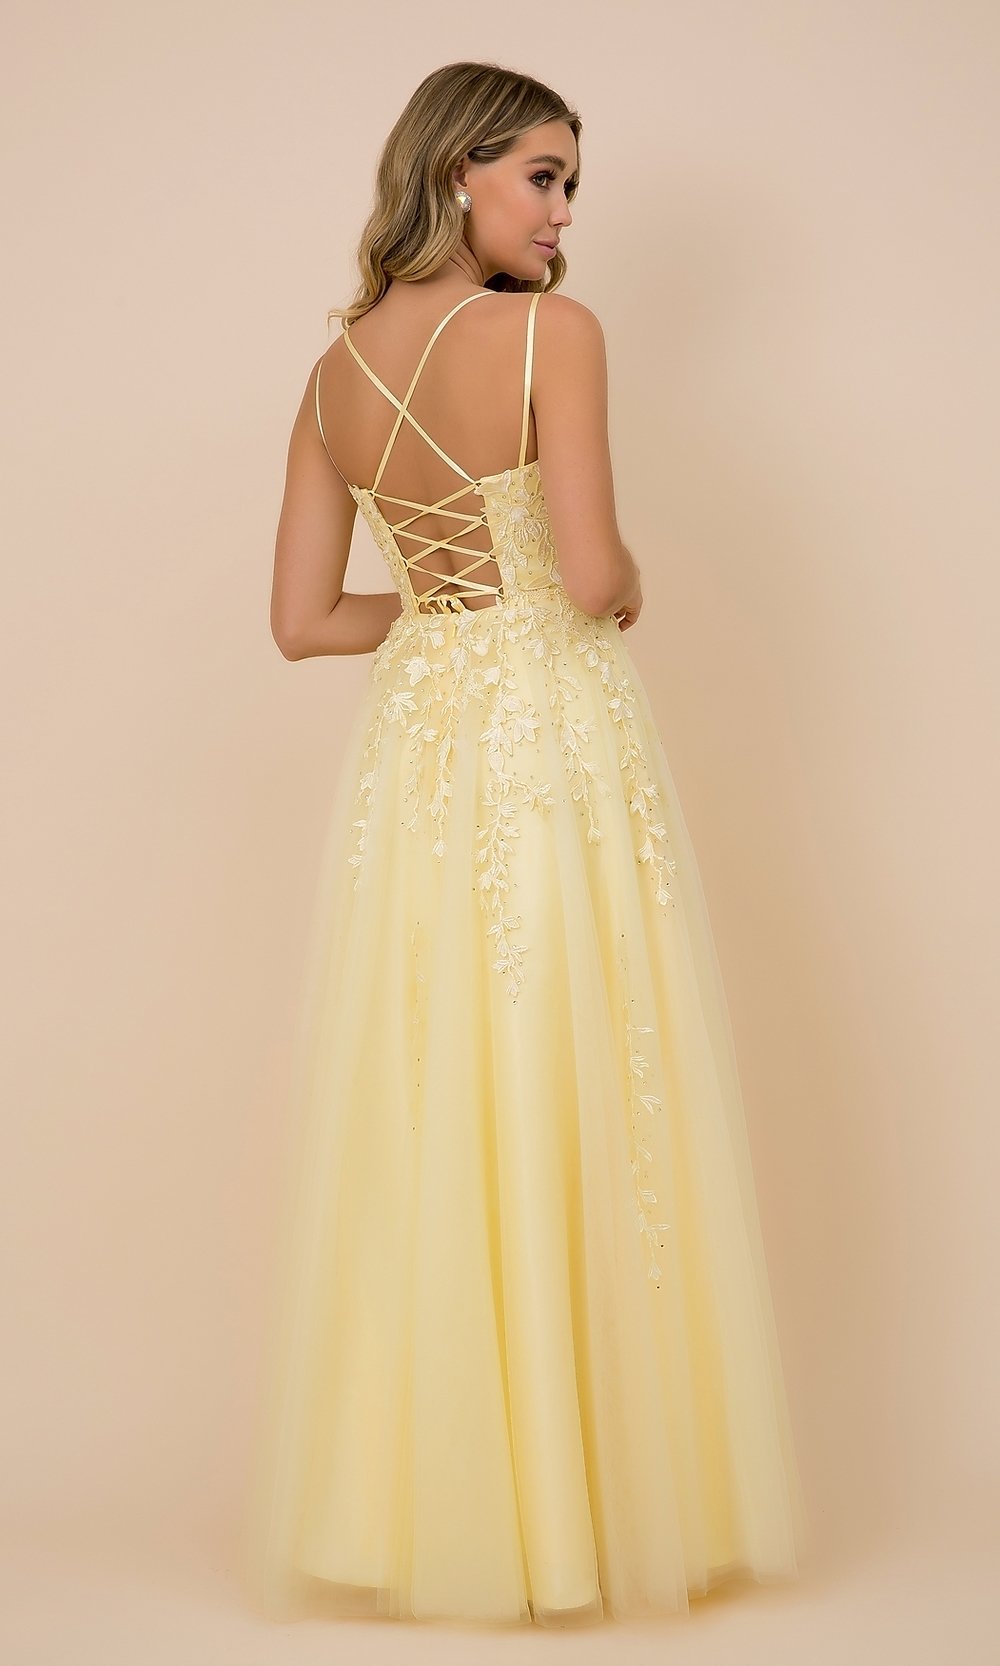  Embroidered Strappy-Back Tulle Ball Gown for Prom